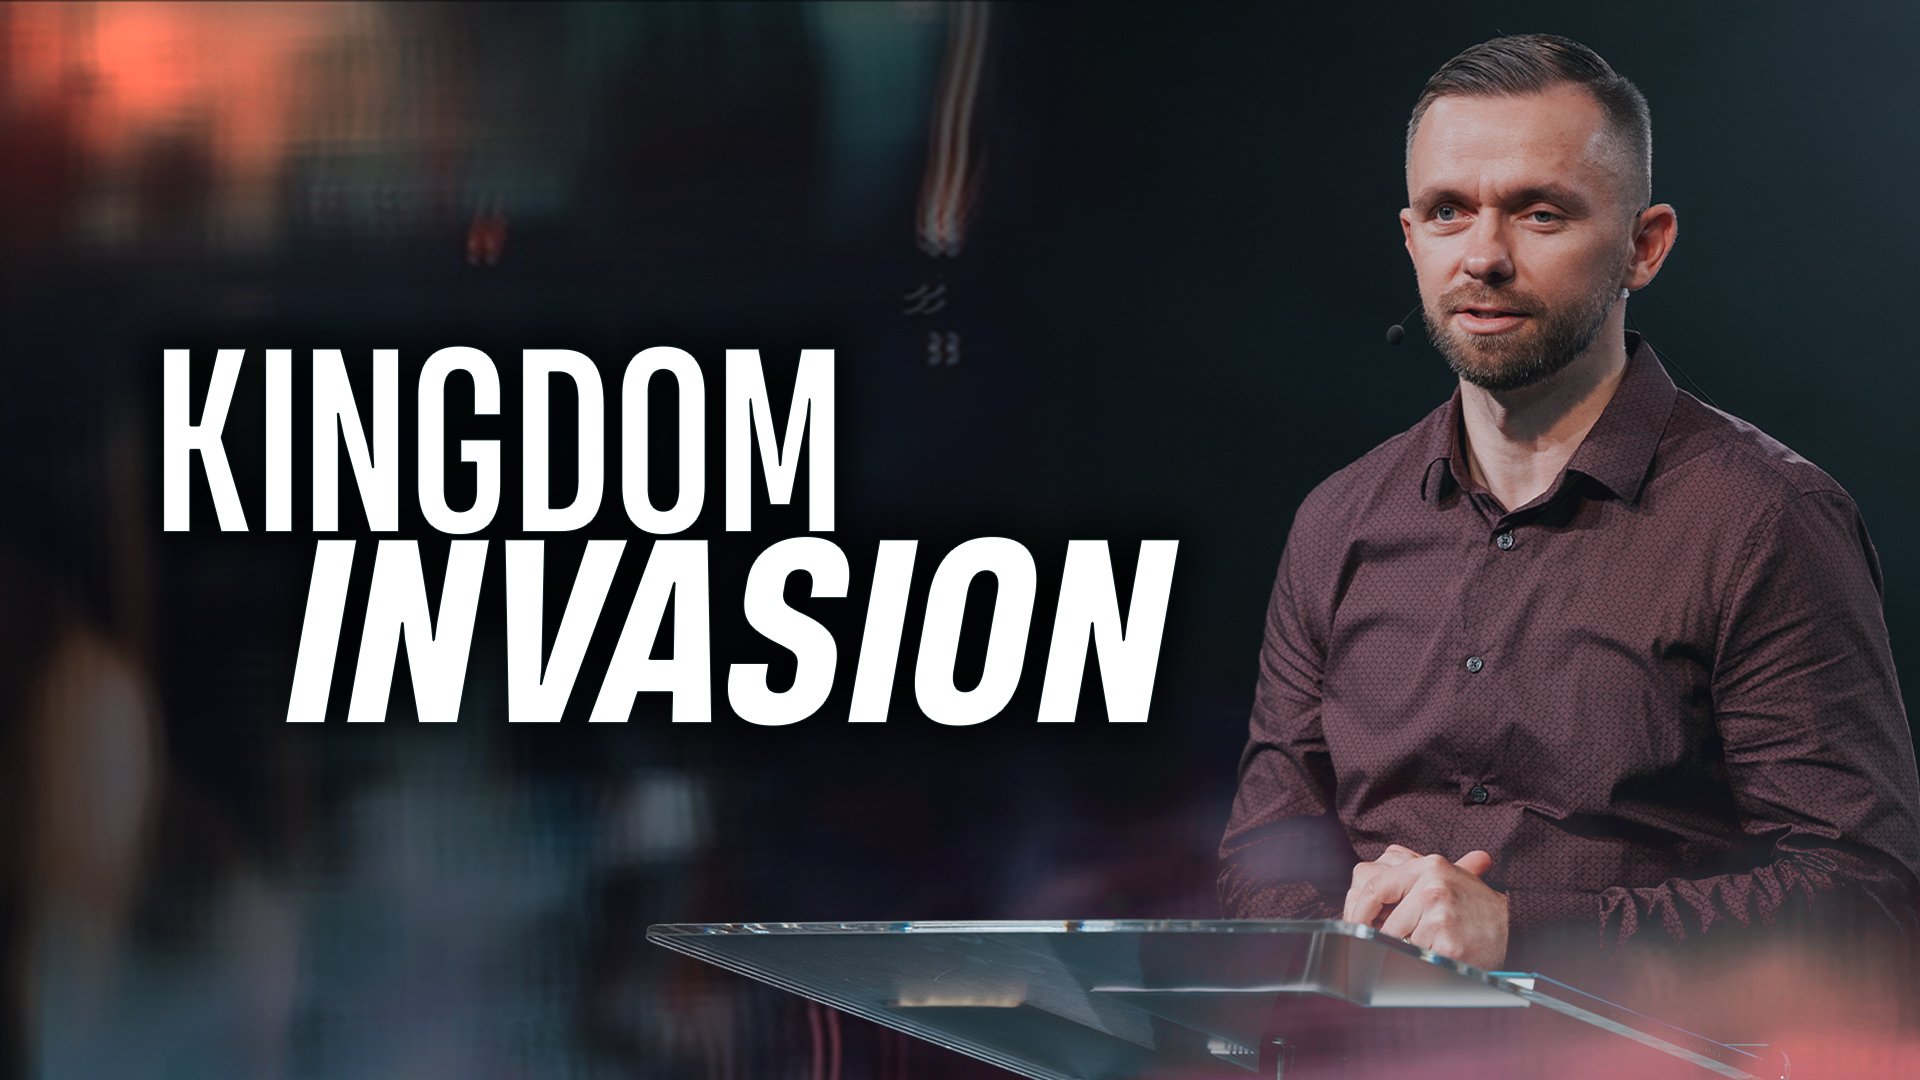 Featured Image for “Kingdom Invasion”